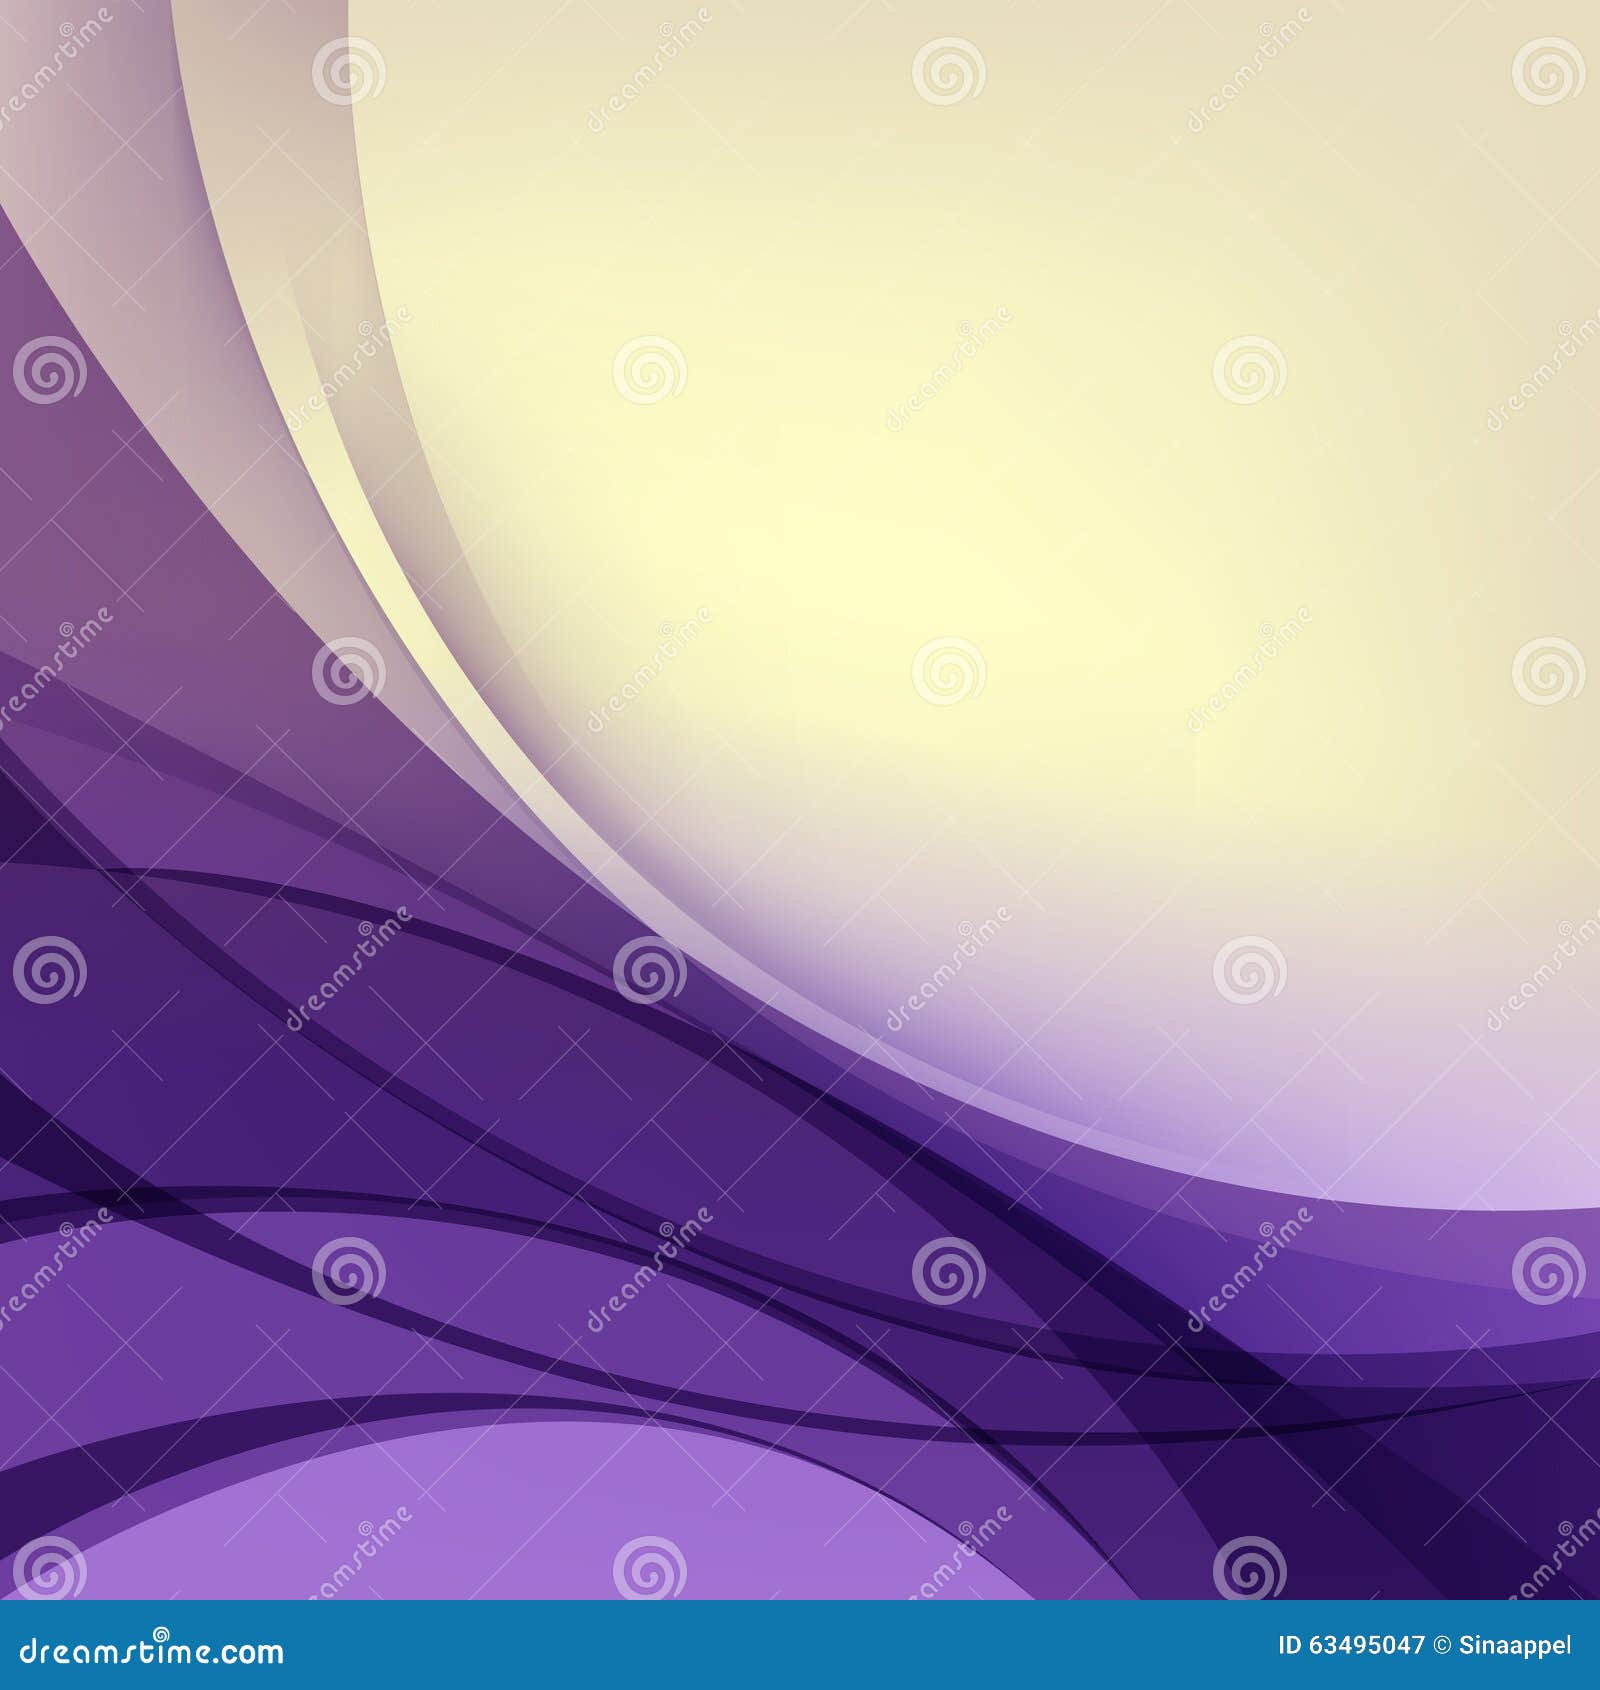 Abstract Purple Yellow Background Stock Vector - Image: 63495047